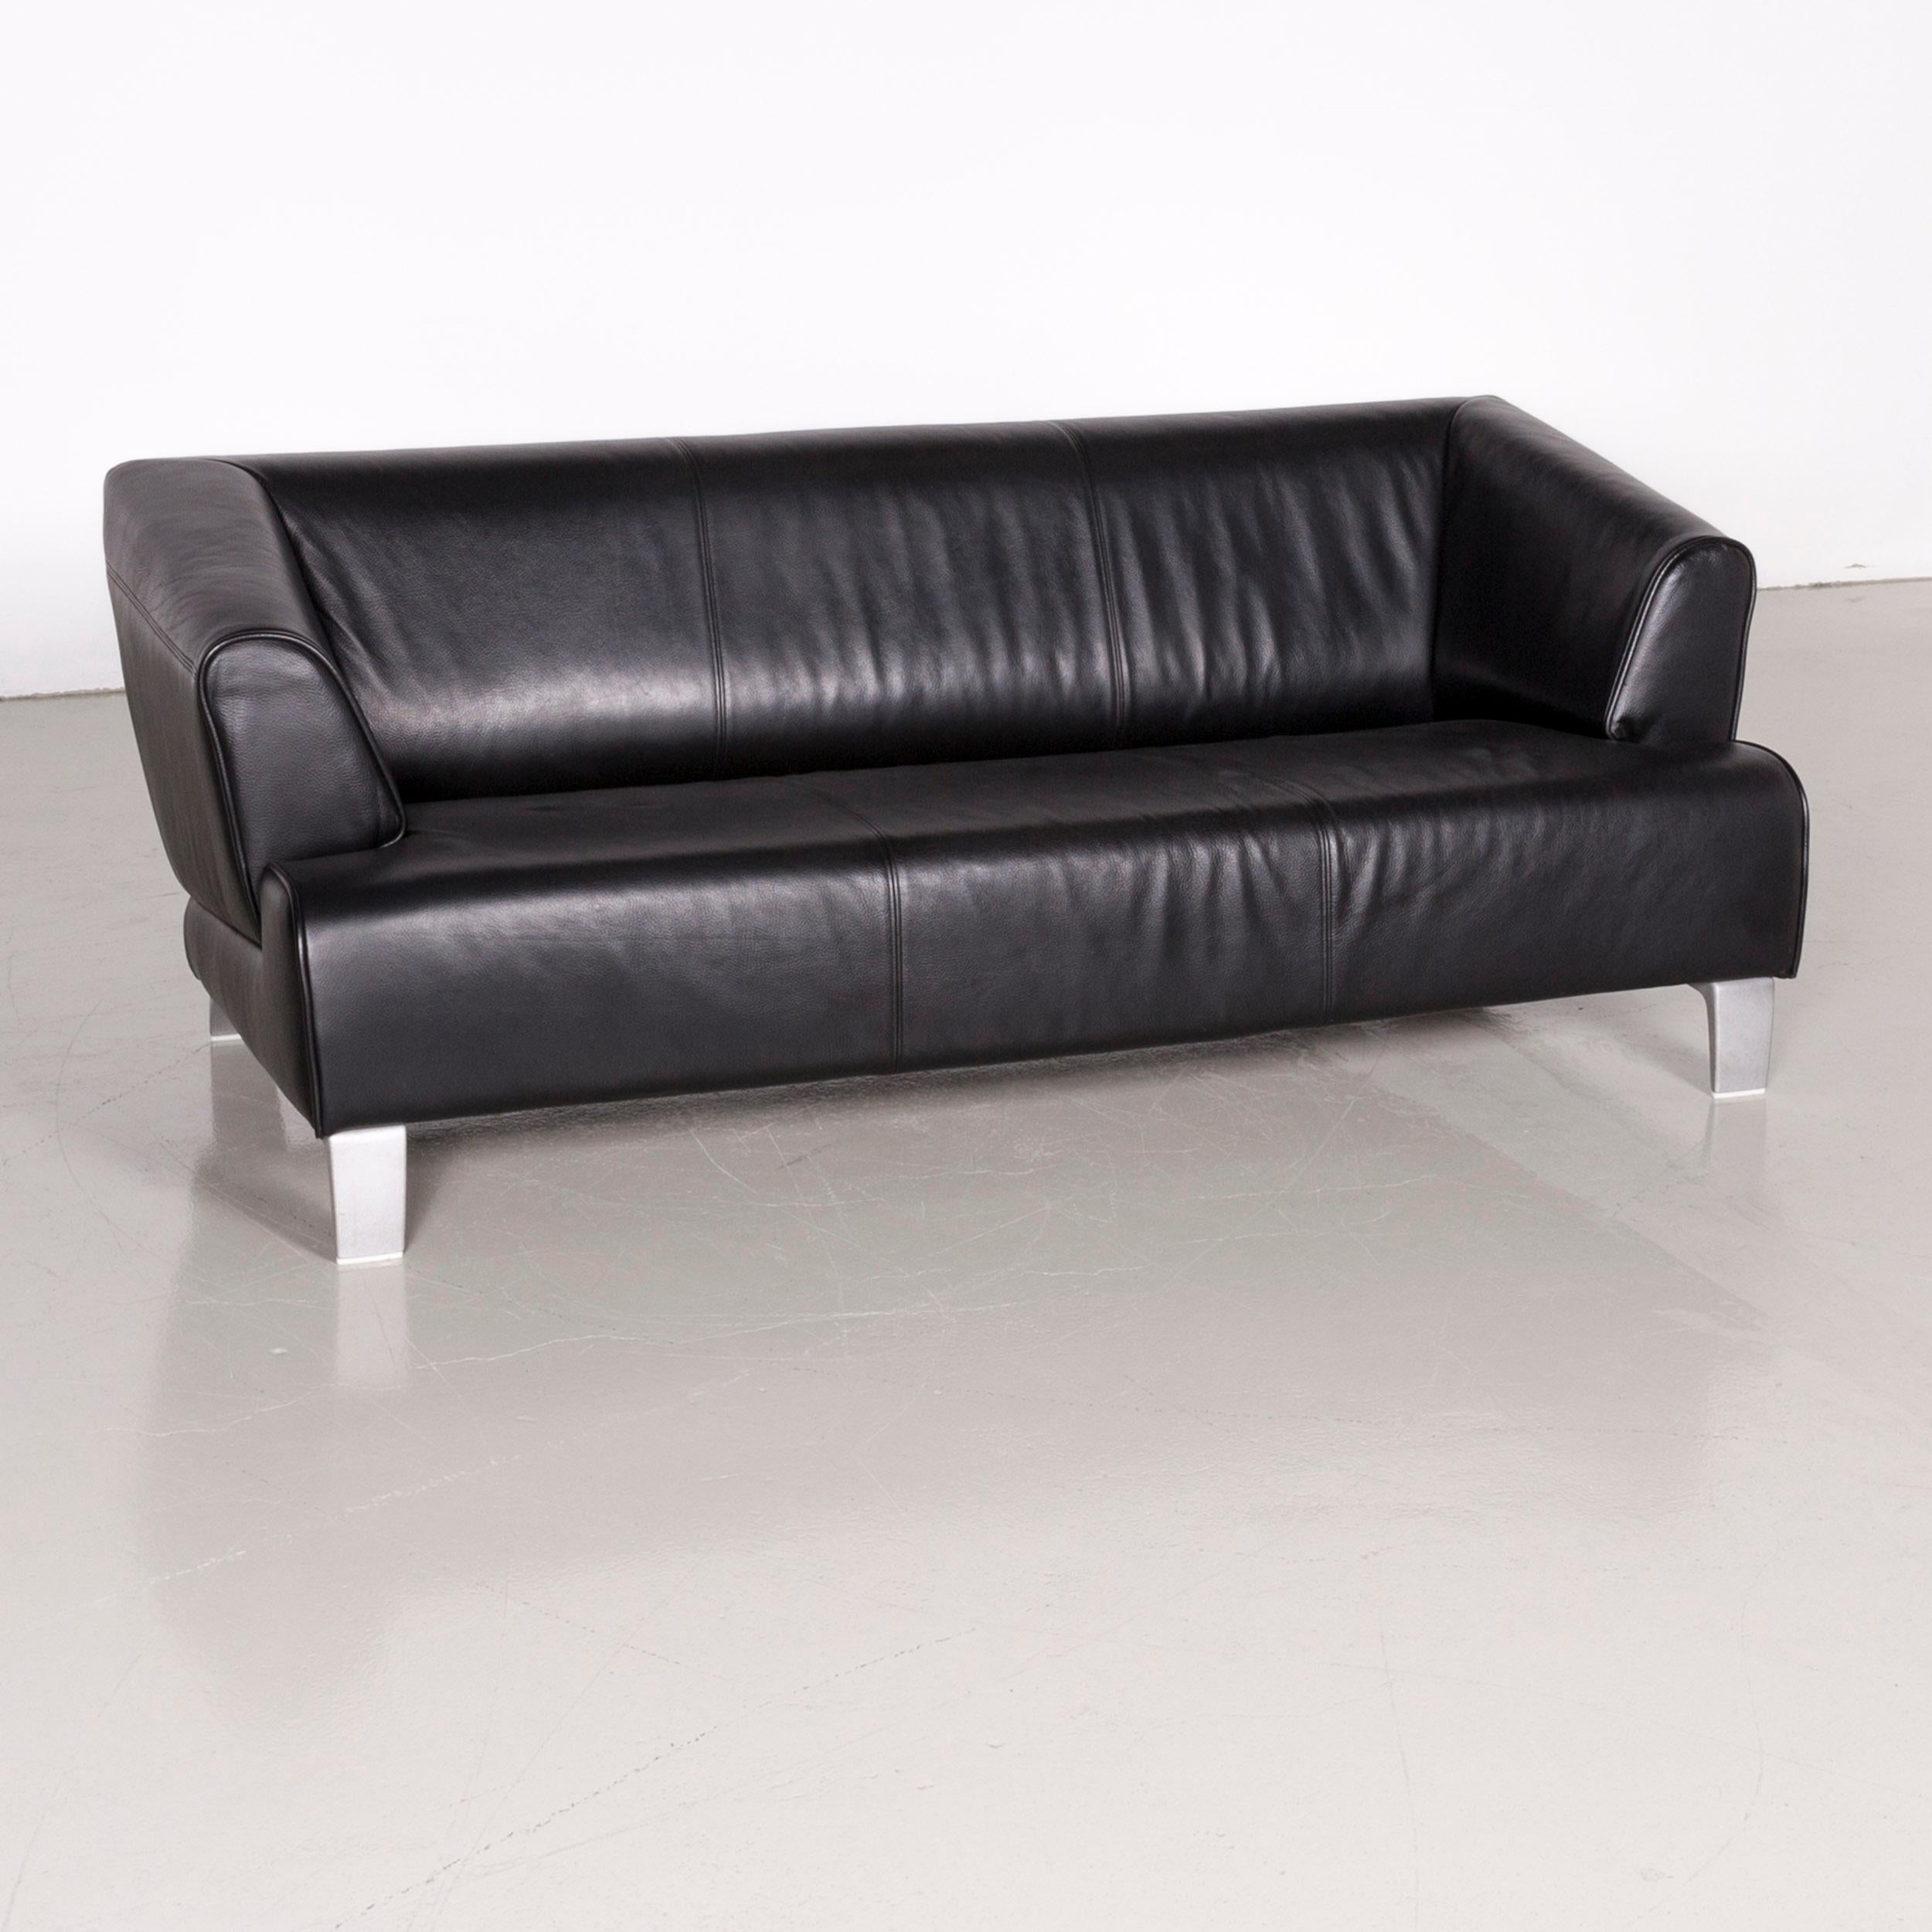 Rolf Benz 2300 designer sofa black two-seat leather couch.